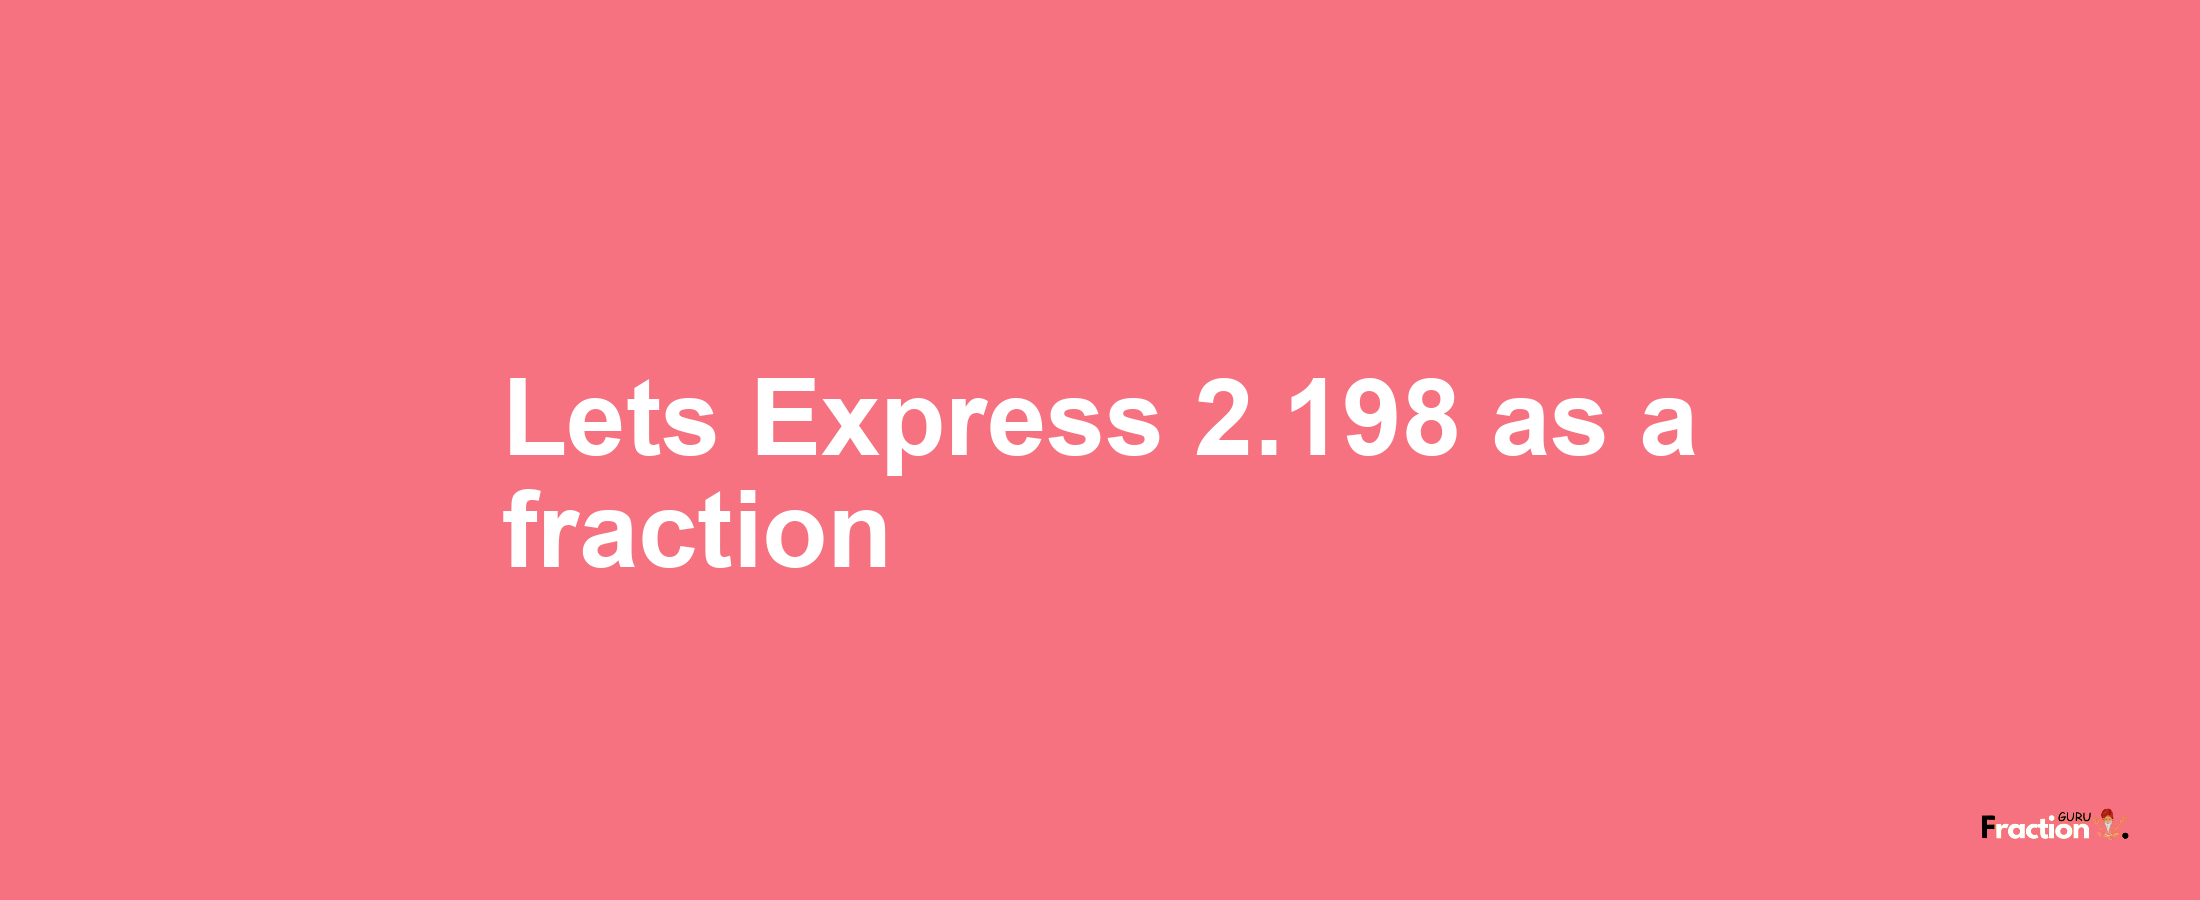 Lets Express 2.198 as afraction